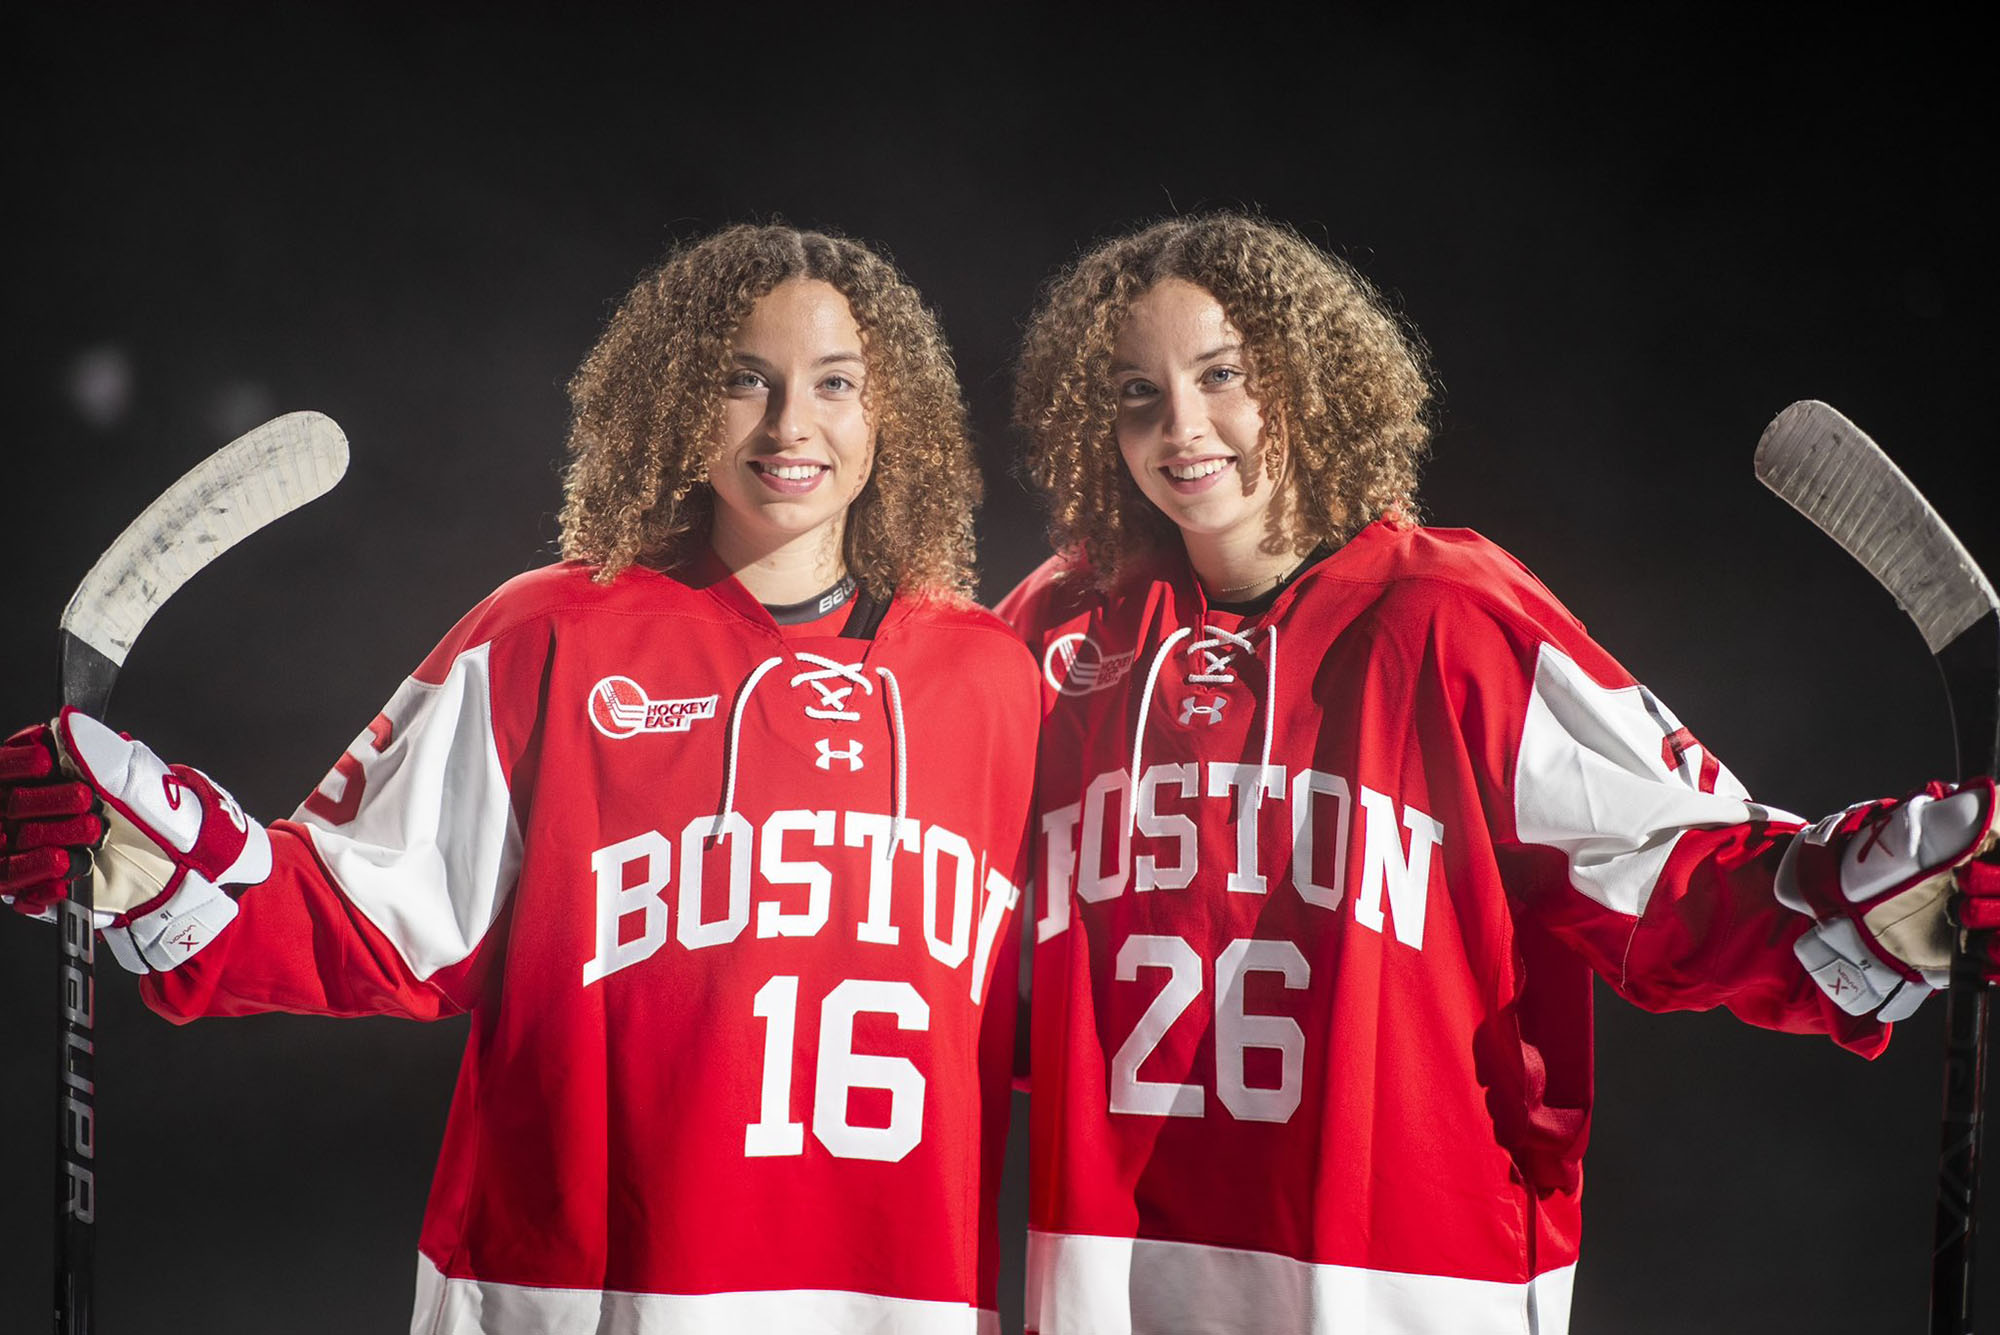 Photo: Two sisters with light brown curly hair pose in a studio for a shoot. They wear BU's hockey uniform--a red uniform with white lettering. They are both smiling.